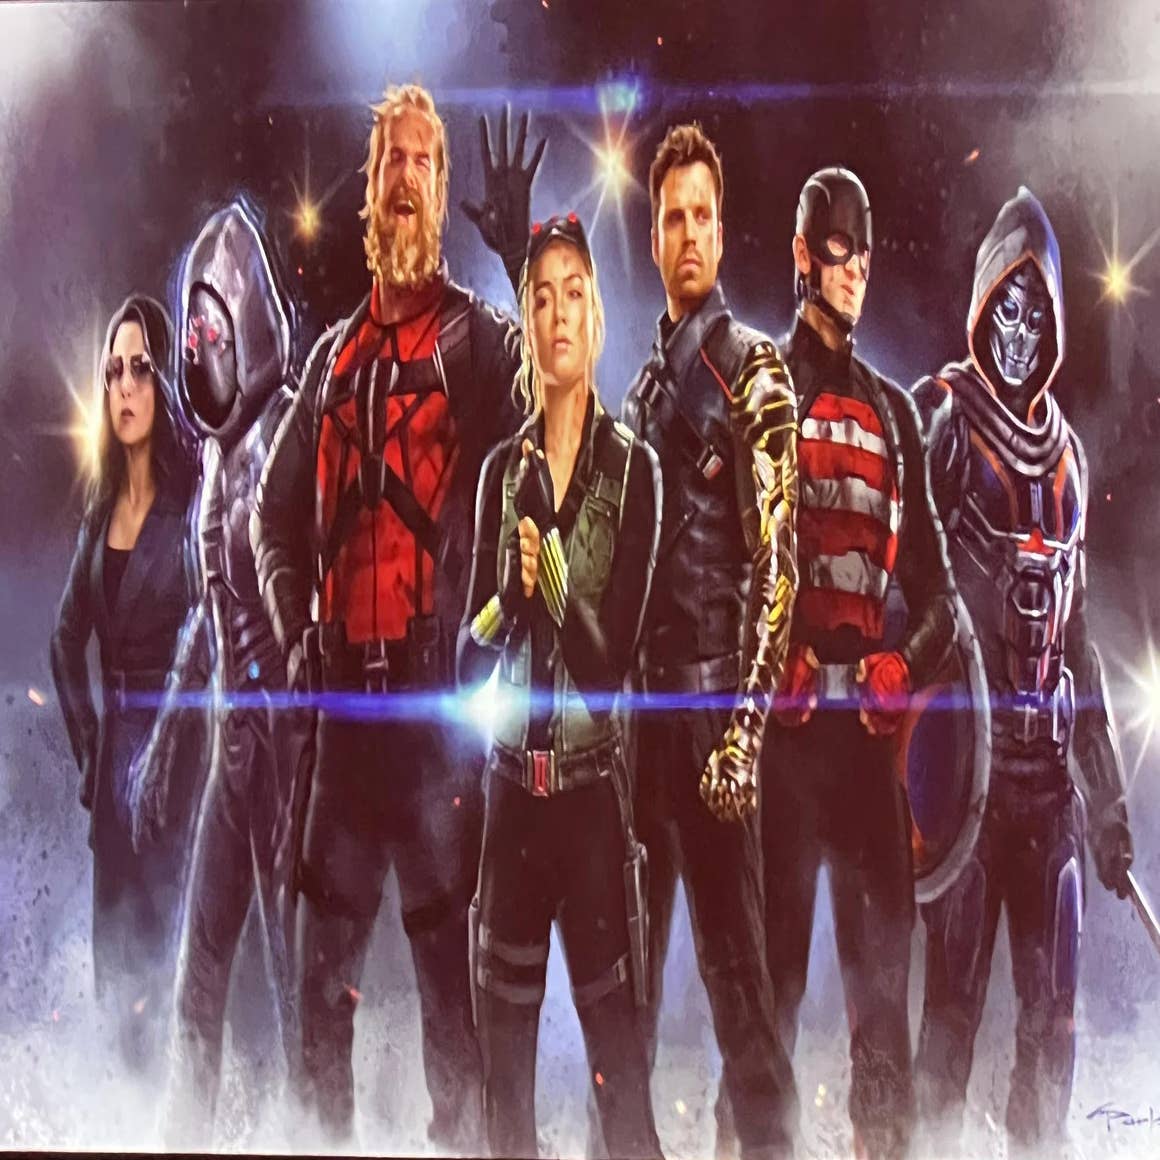 New Marvel movie and TV releases: What's coming out in 2024 and